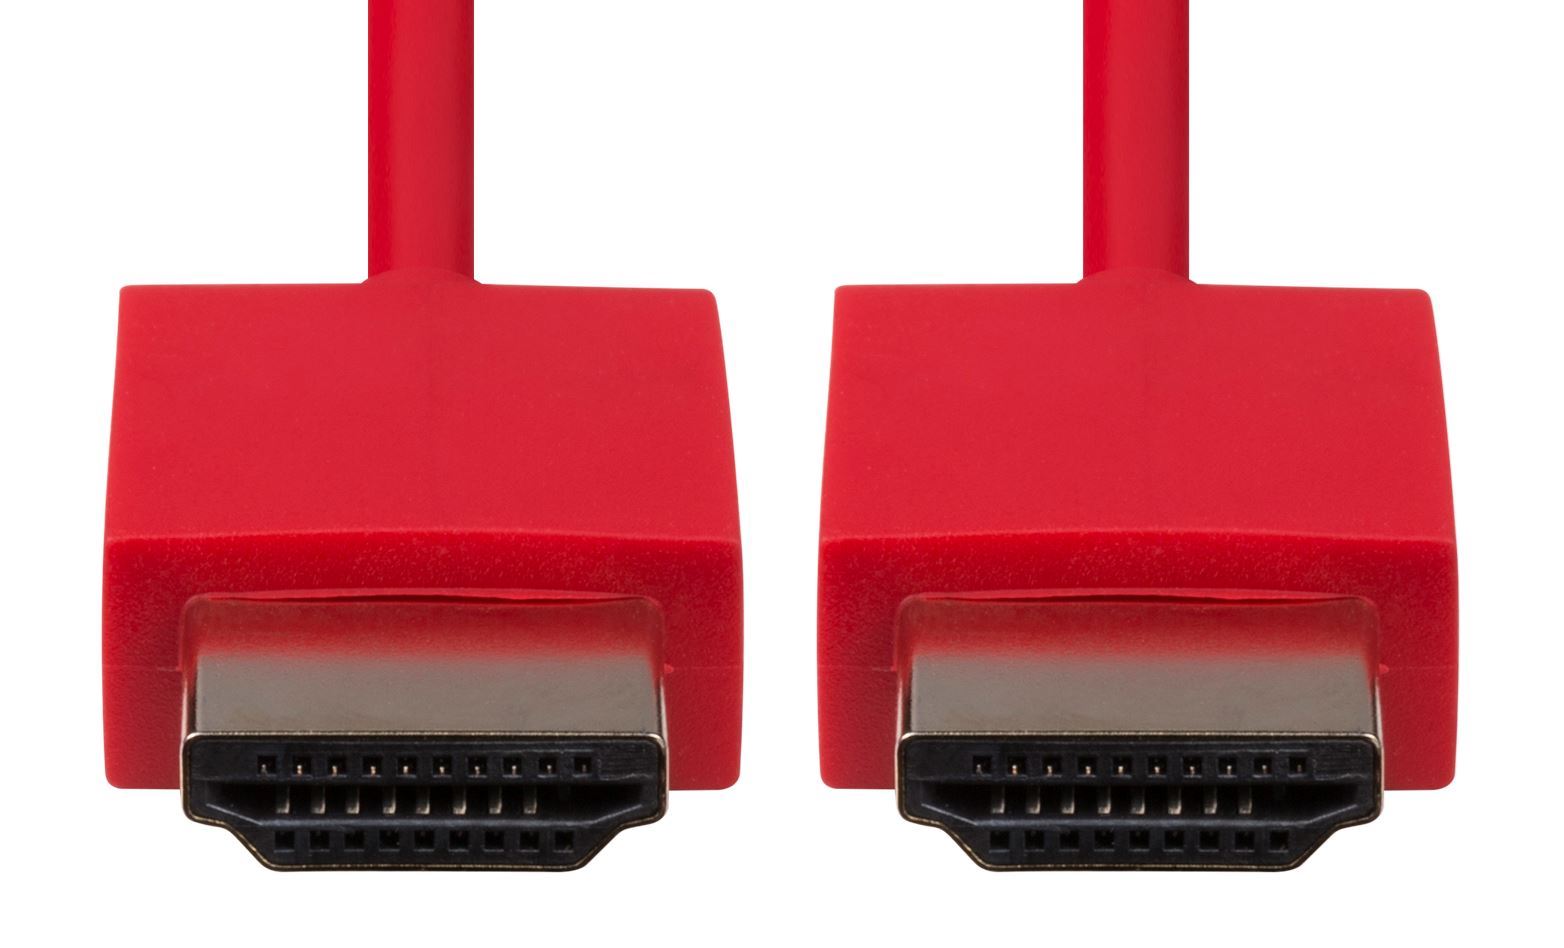 DYNAMIX_1.5M_HDMI_RED_Nano_High_Speed_With_Ethernet_Cable._Designed_for_UHD_Display_up_to_4K2K@60Hz._Slimline_Robust_Cable._Supports_CEC_2.0,_3D,_&_ARC._Supports_Up_to_32_Audio_Channels. 773